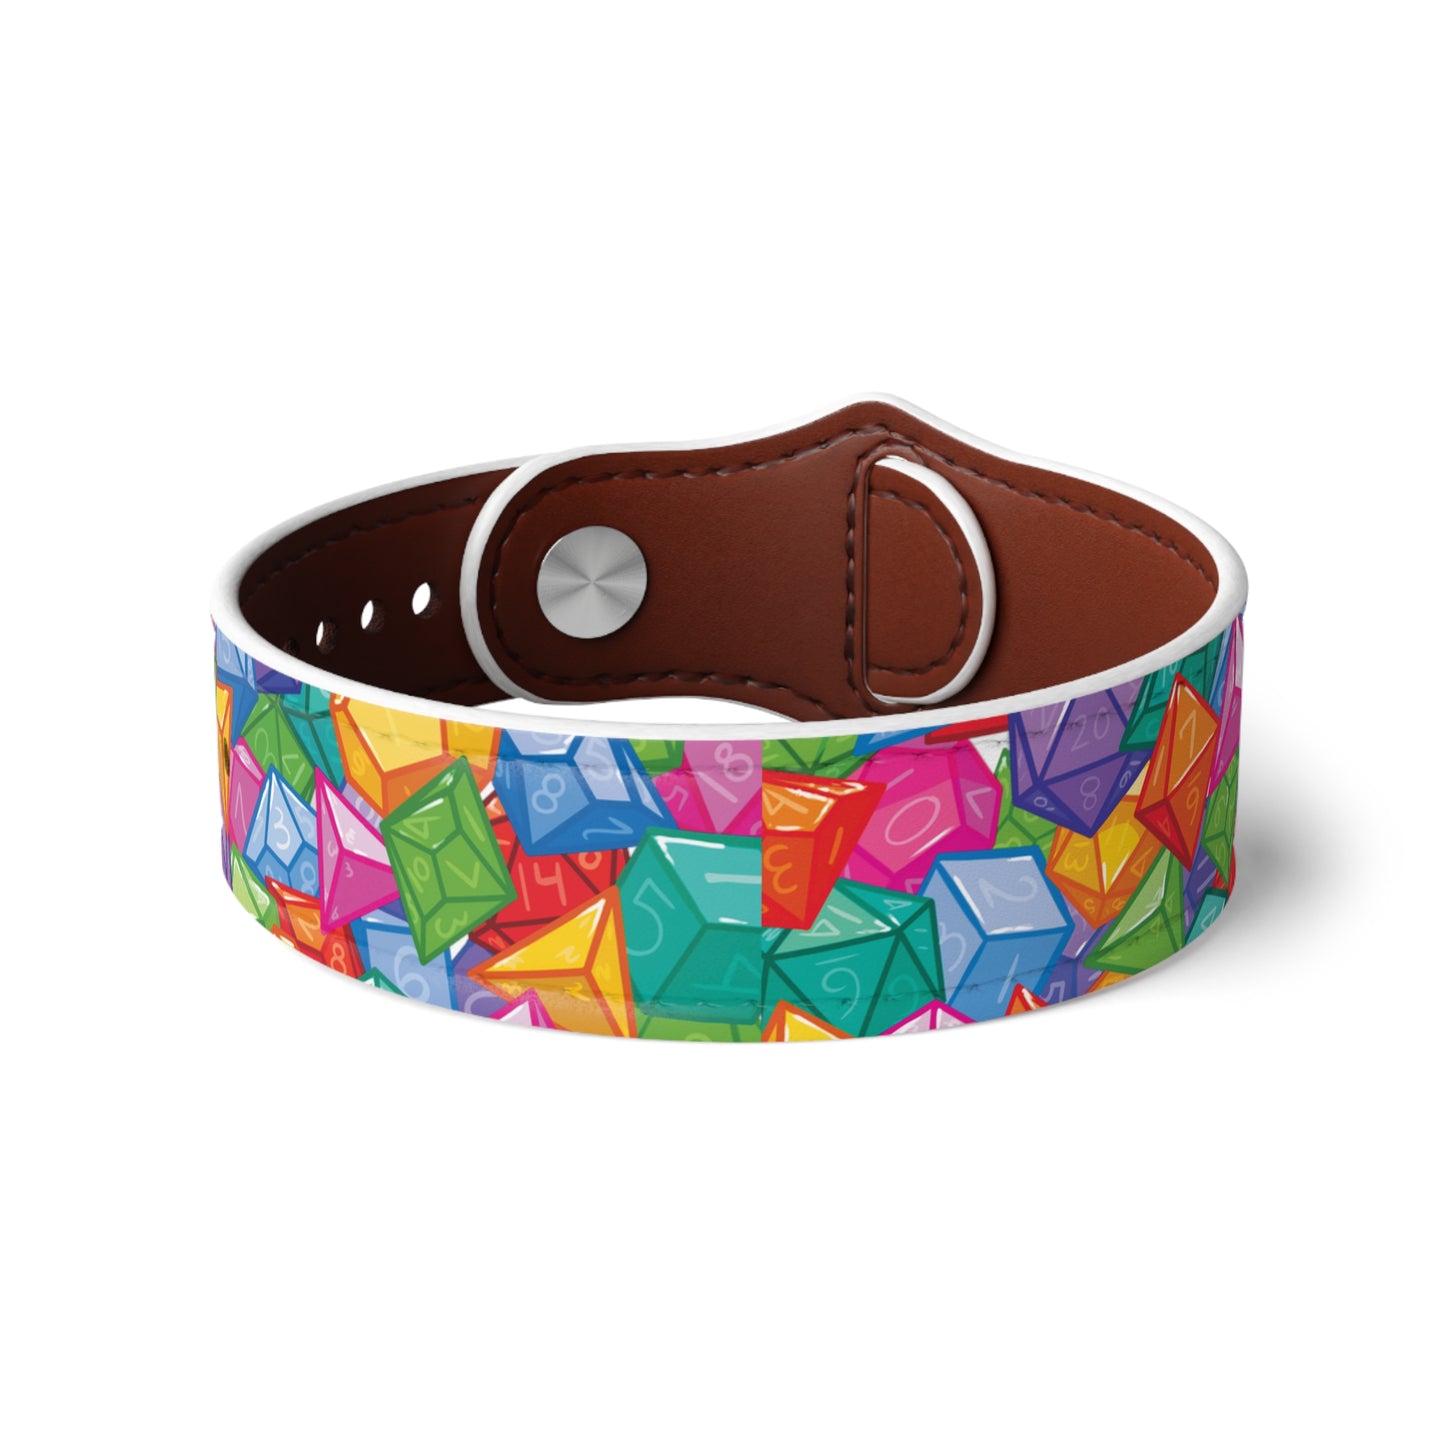 "Dice" - Faux Leather Wristband